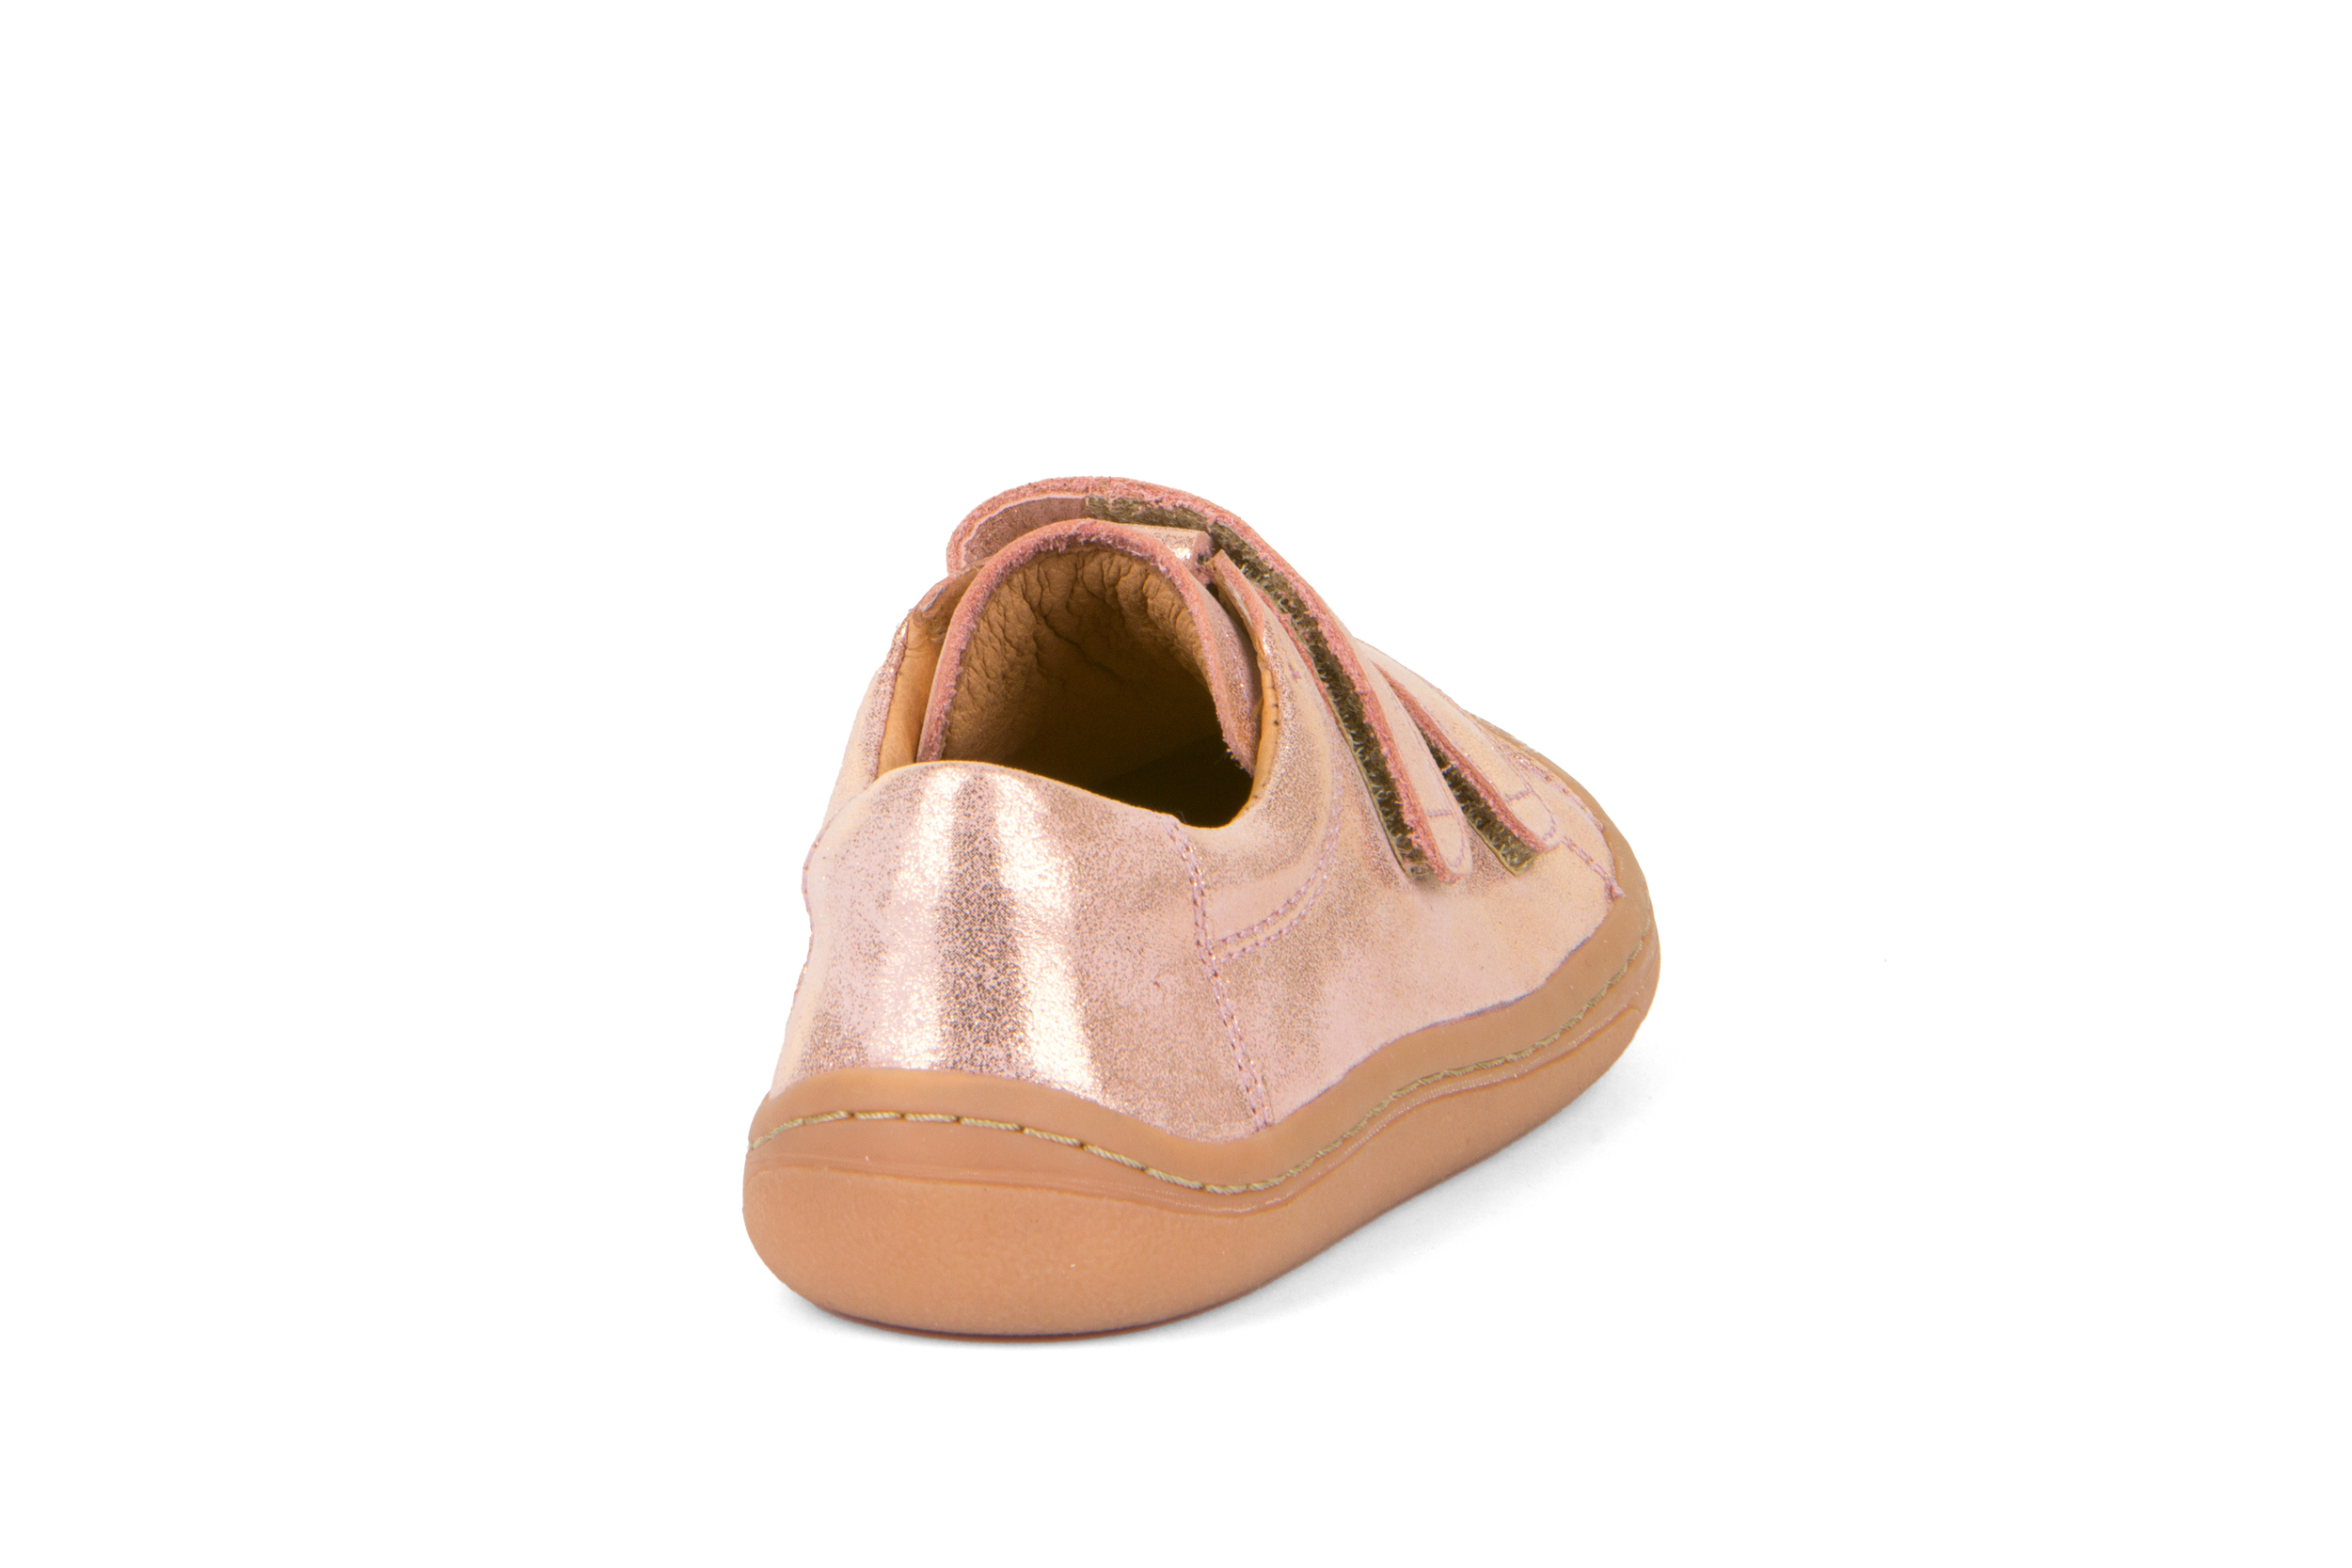 sneakers cuir froddo barefoot pink gold G3130225-11 sur la boutique liberty pieds-2